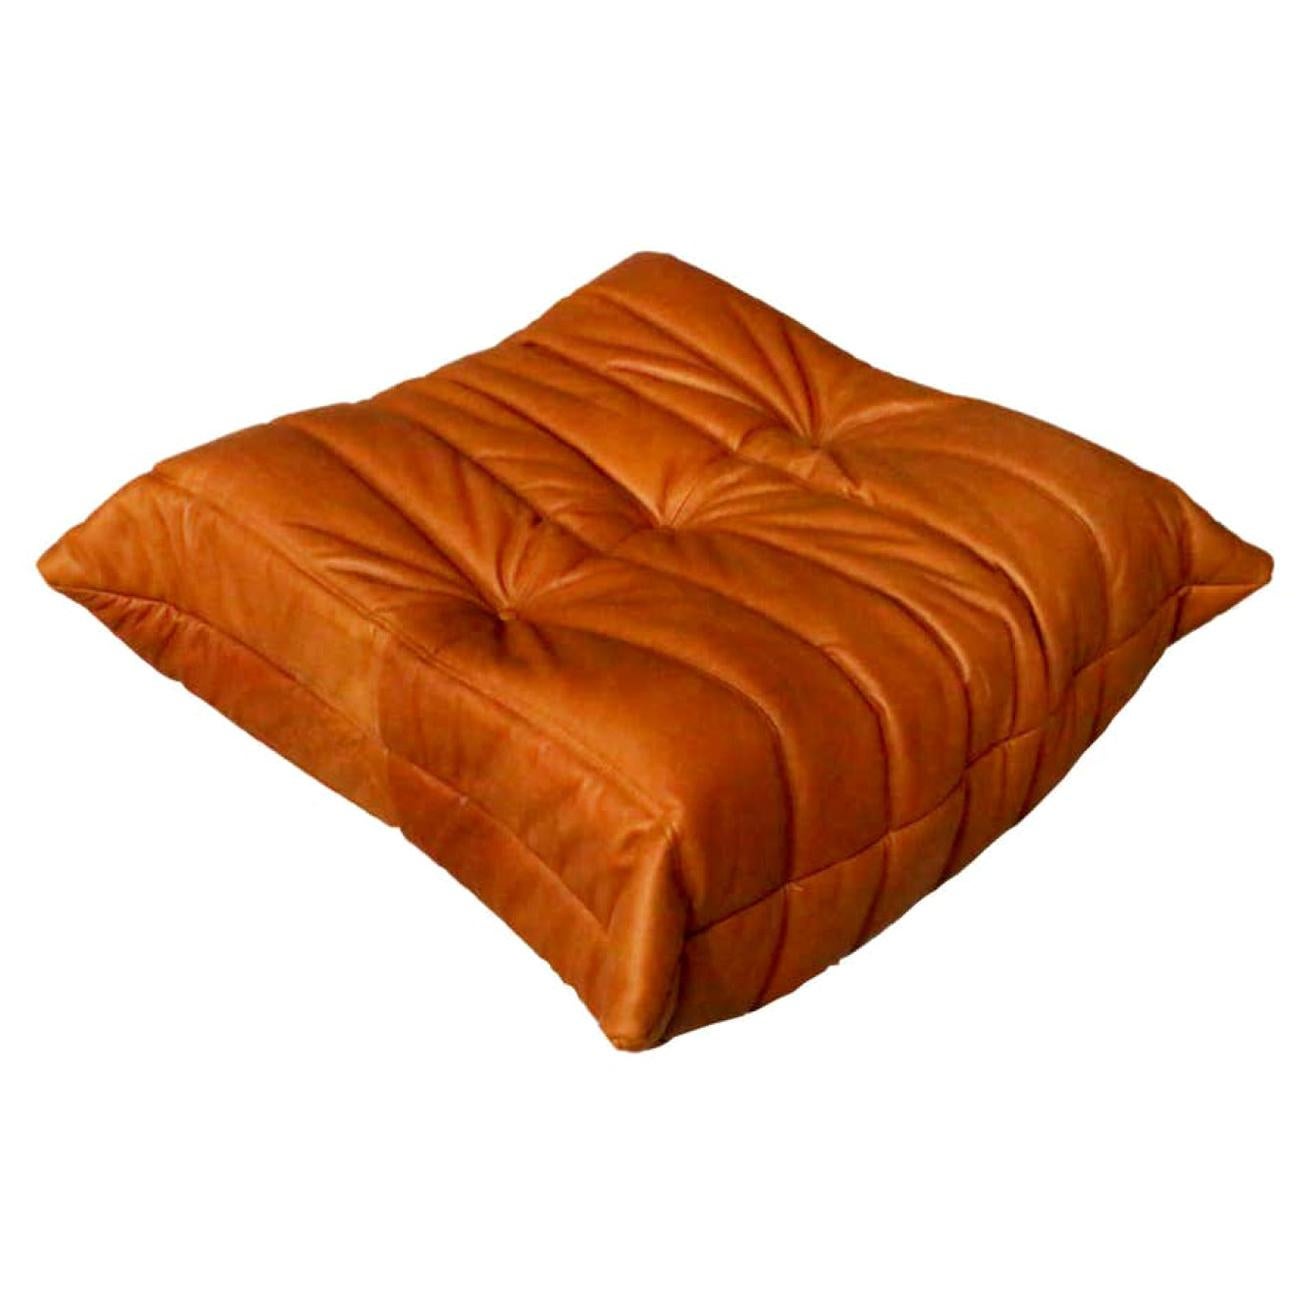 CERTIFIED Ligne Roset TOGO Pouf in our natural Cognac Leather, DIAMOND QUALITY For Sale